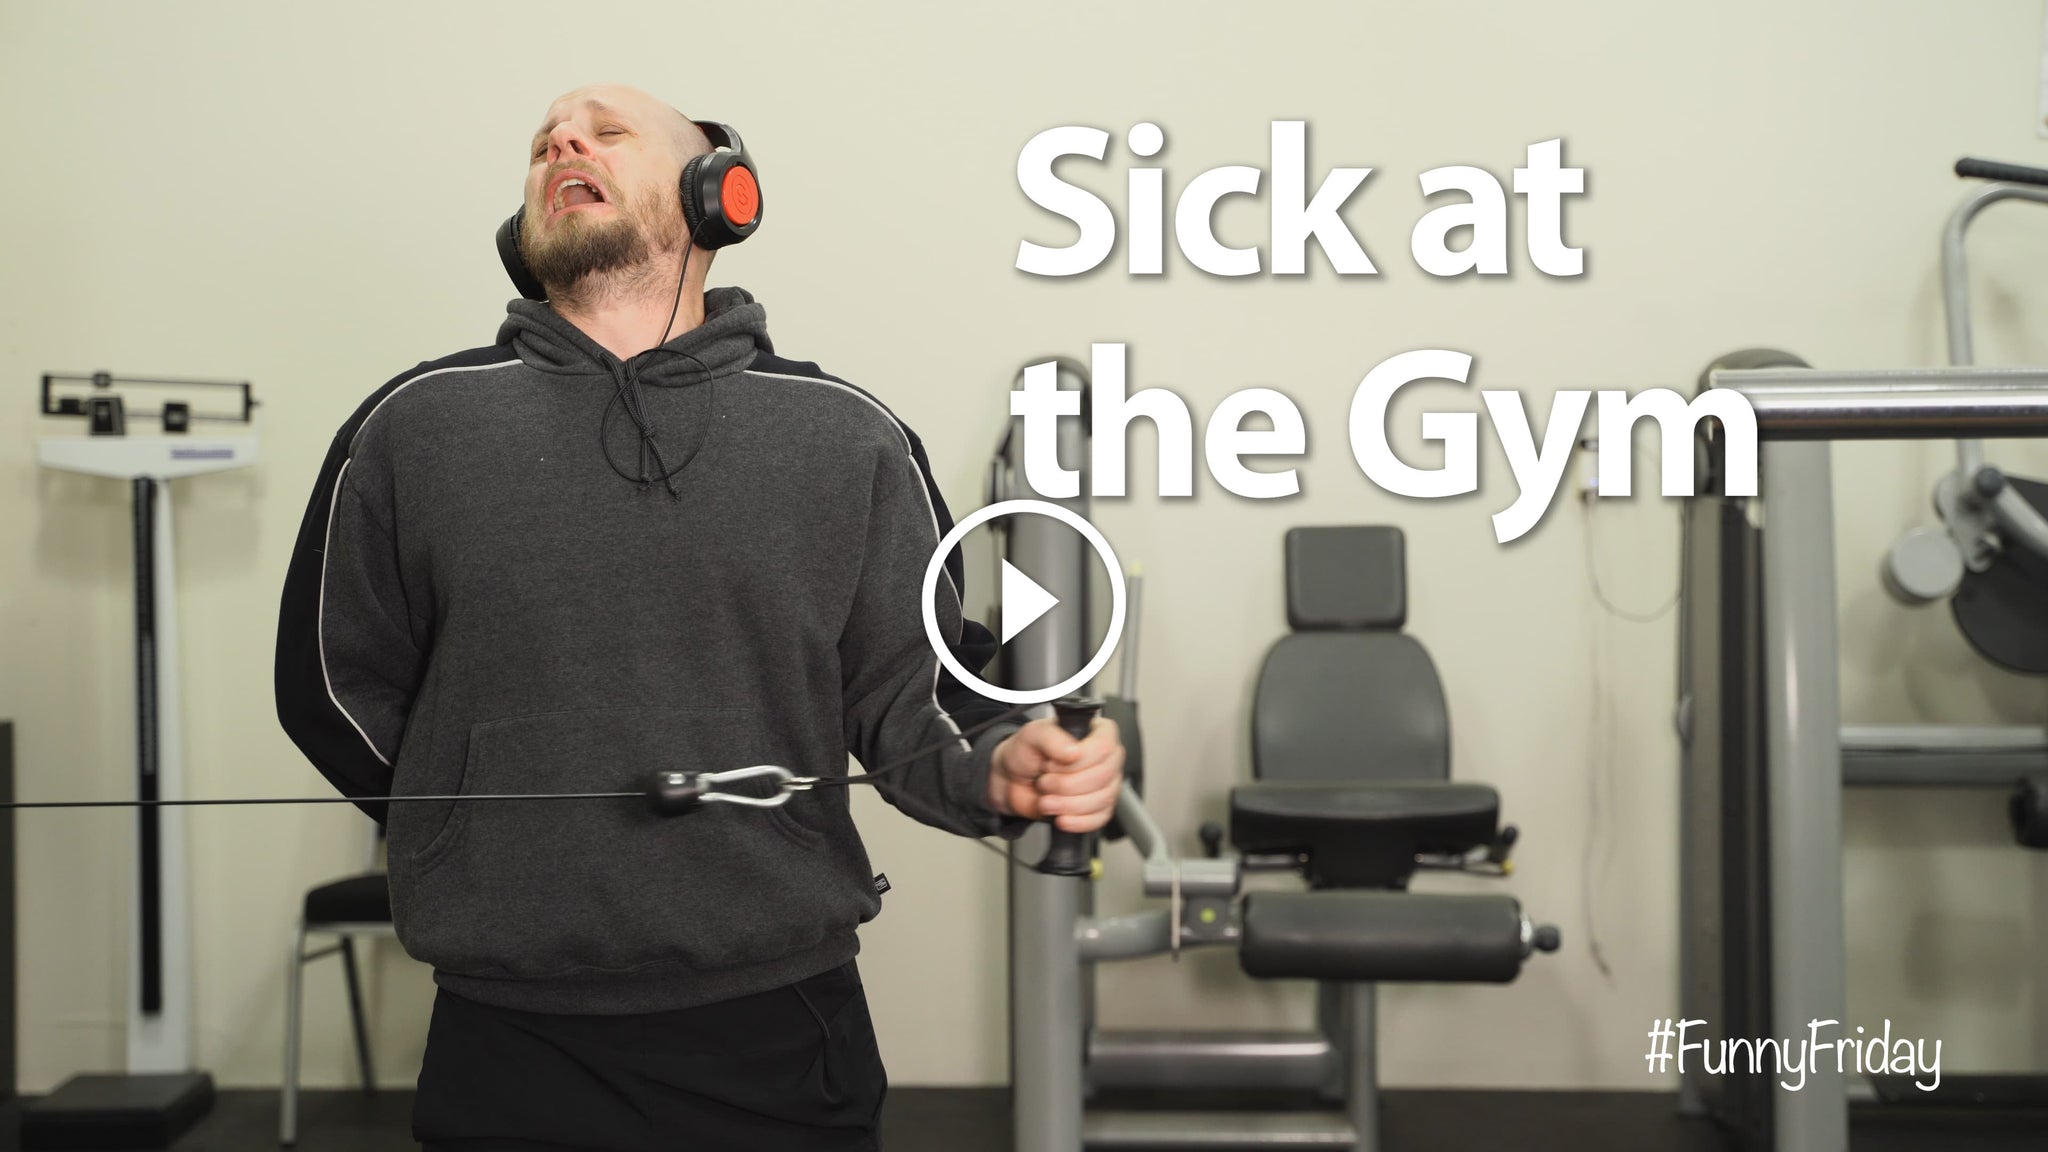 Sick at the Gym | #FunnyFriday